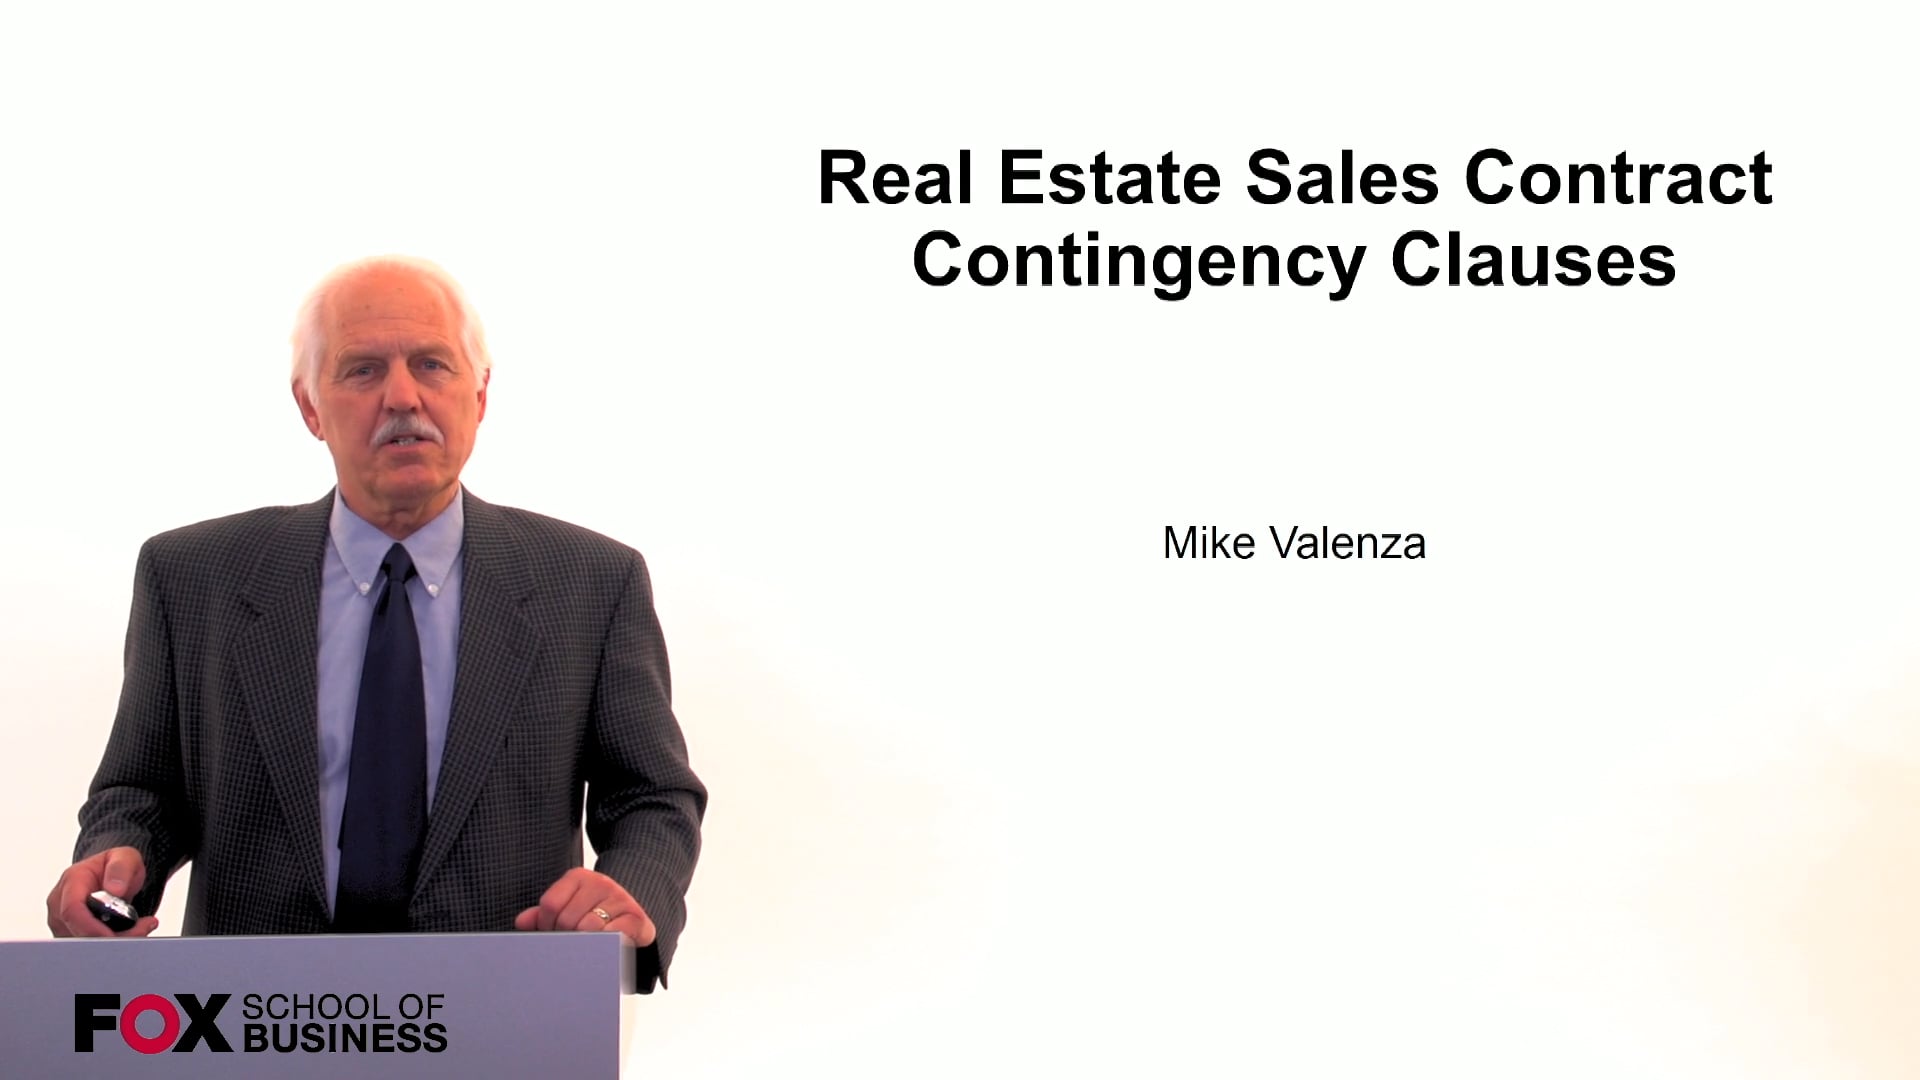 Real Estate Sales Contract Contingency Clauses